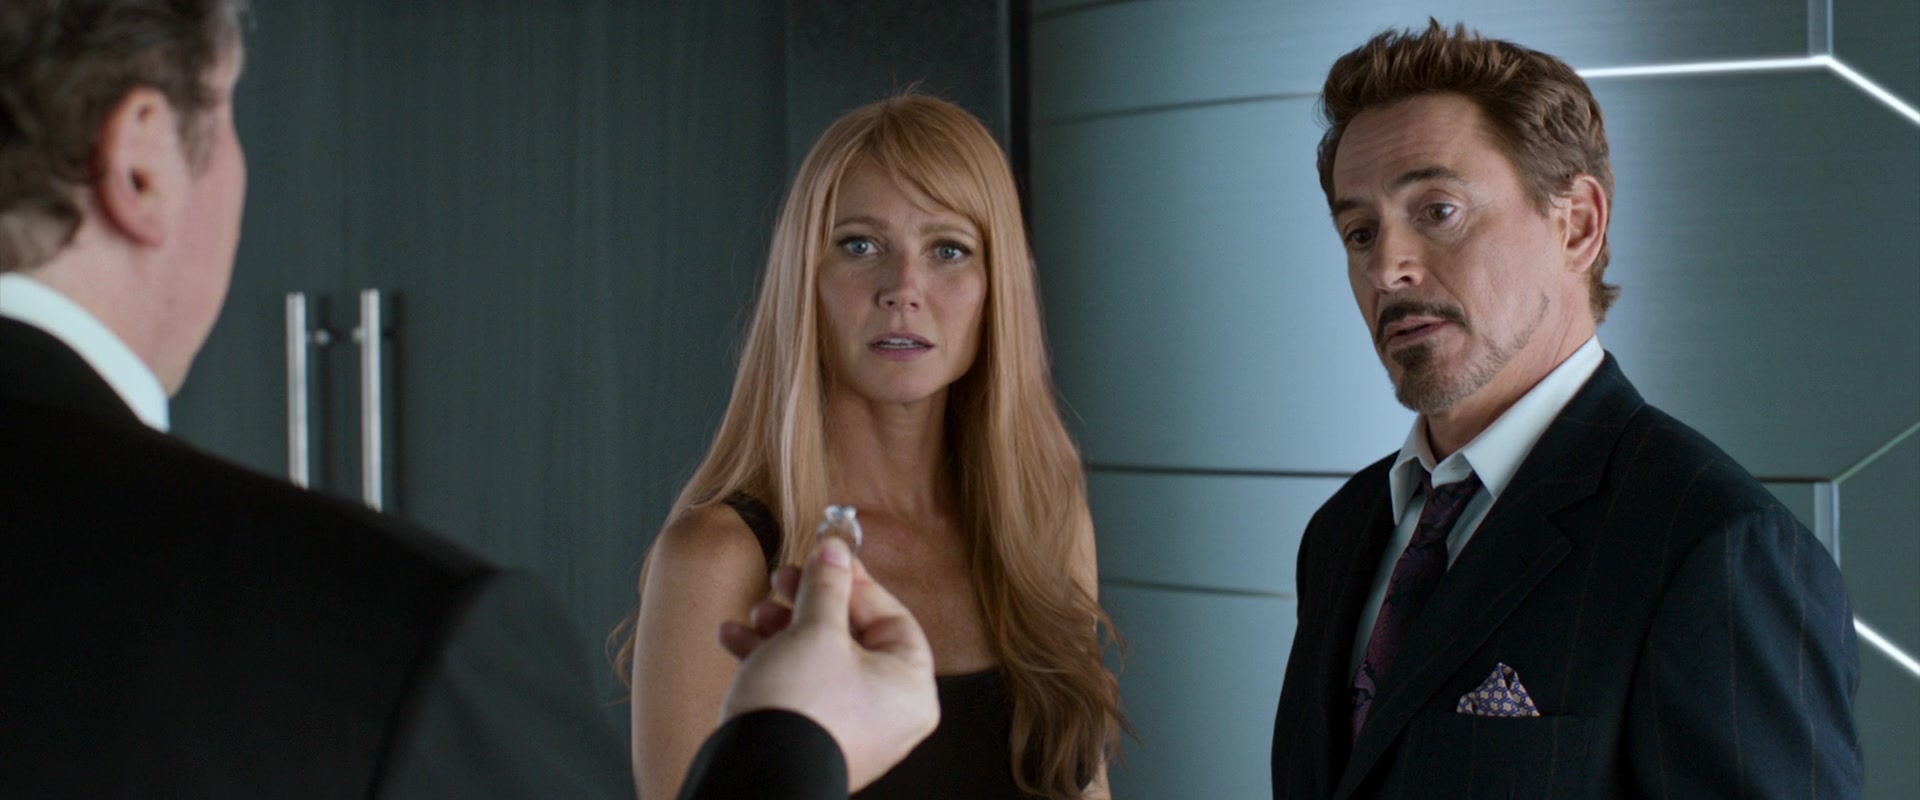 Tony Stark (Robert Downey Jr.) and Pepper Potts (Gwenyth Paltrow) take Happy's (Jon Favreau) suggestion to announce their engagement in place of Spider-Man's (Tom Holland) Avengers membership in Spider-Man: Homecoming (2017), Marvel Entertainment